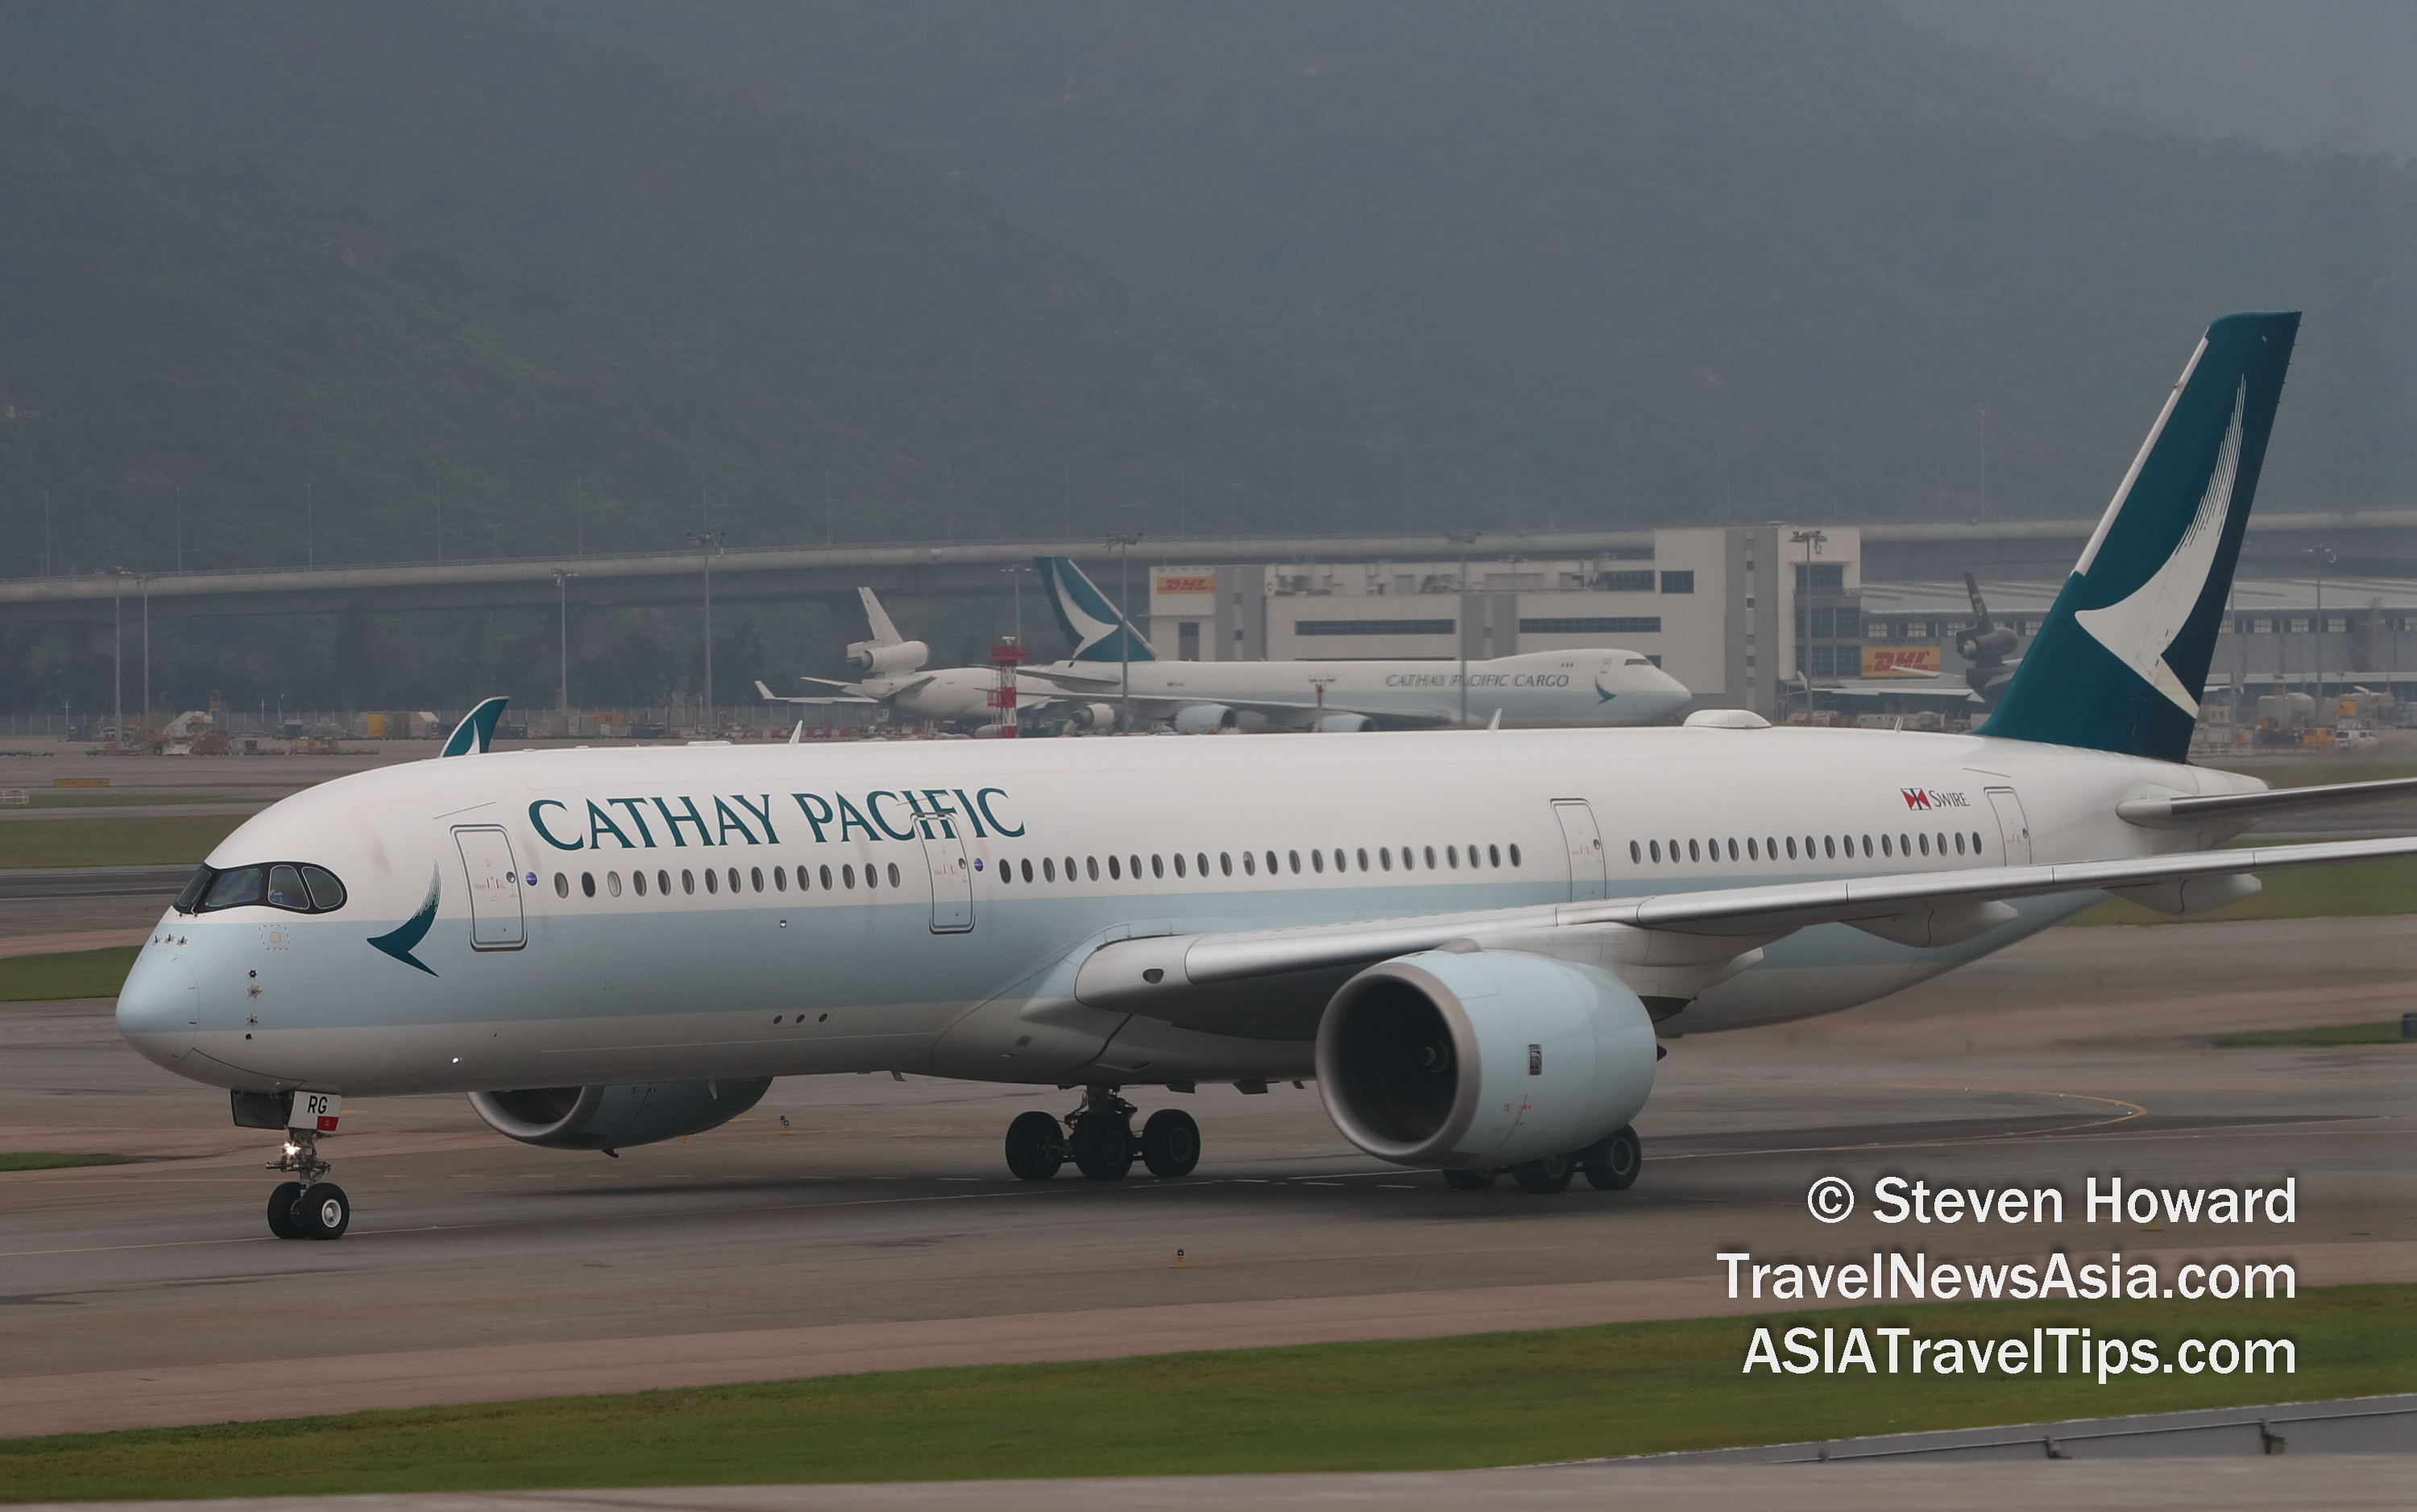 Cathay Pacific Airbus A350 in the foreground with a Cathay Cargo Boeing 747F in the background. Picture by Steven Howard of TravelNewsAsia.com Click to enlarge.